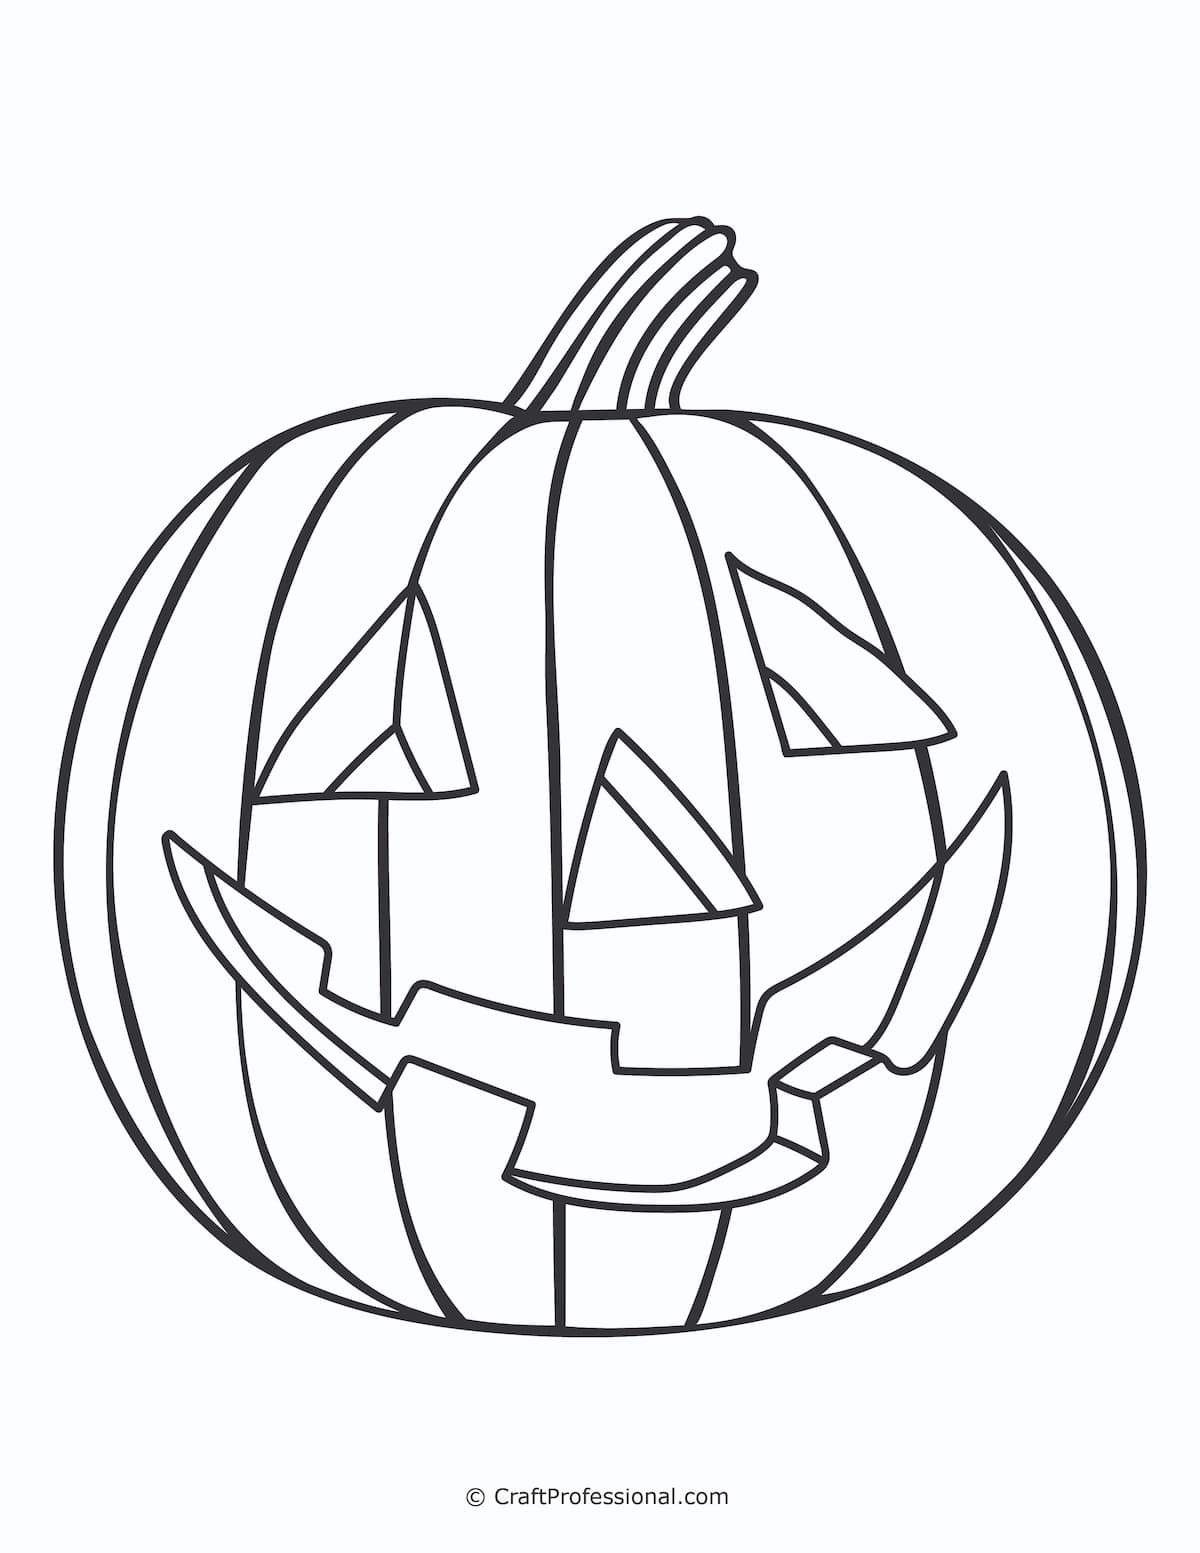 19 Pumpkin Coloring Pages Free Printables for Kids Adults to Color